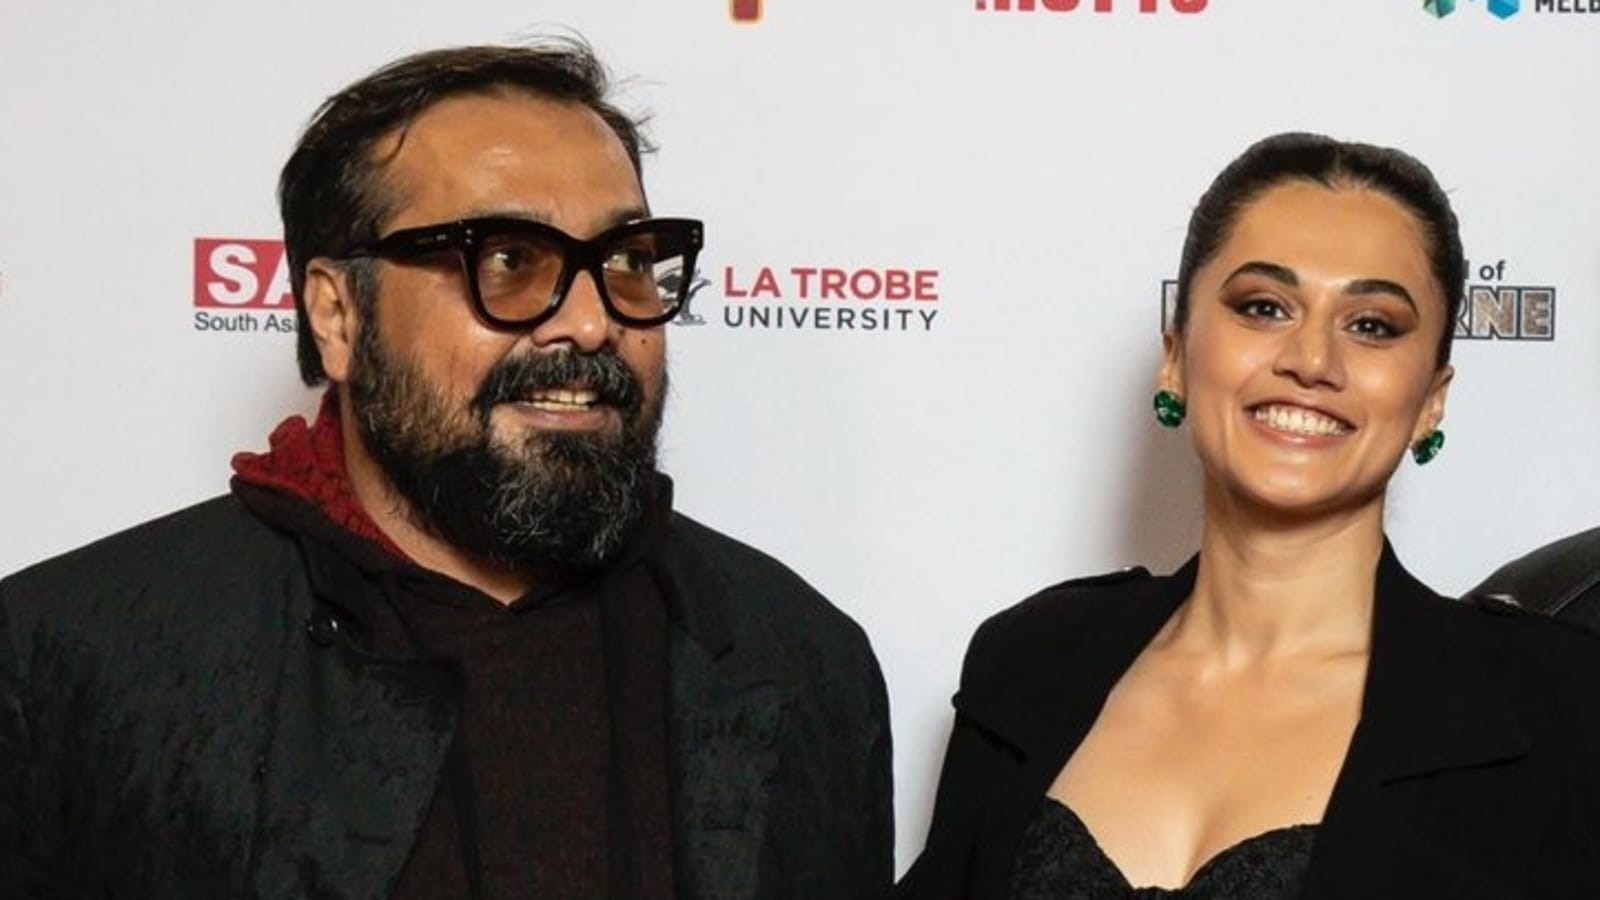 South Indian Girl Big Boobs - Anurag Kashyap jokes about his body: 'I have bigger boobs than Taapsee  Pannu' | Bollywood - Hindustan Times